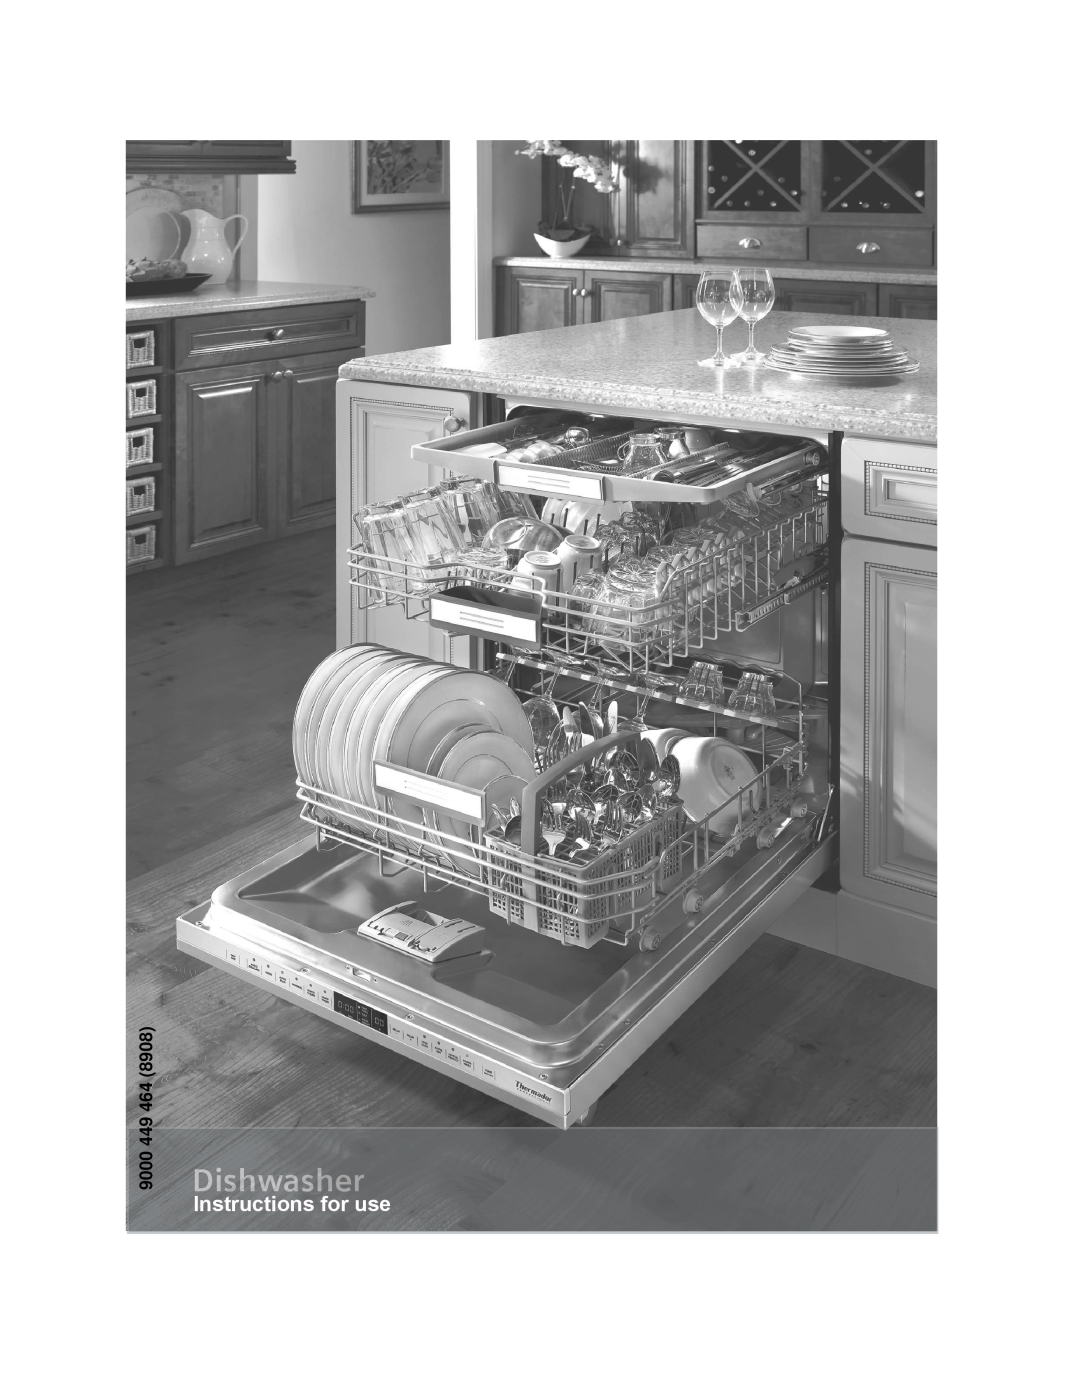 Thermador Dishwasher manual Instructions for use, 9000 449 464 